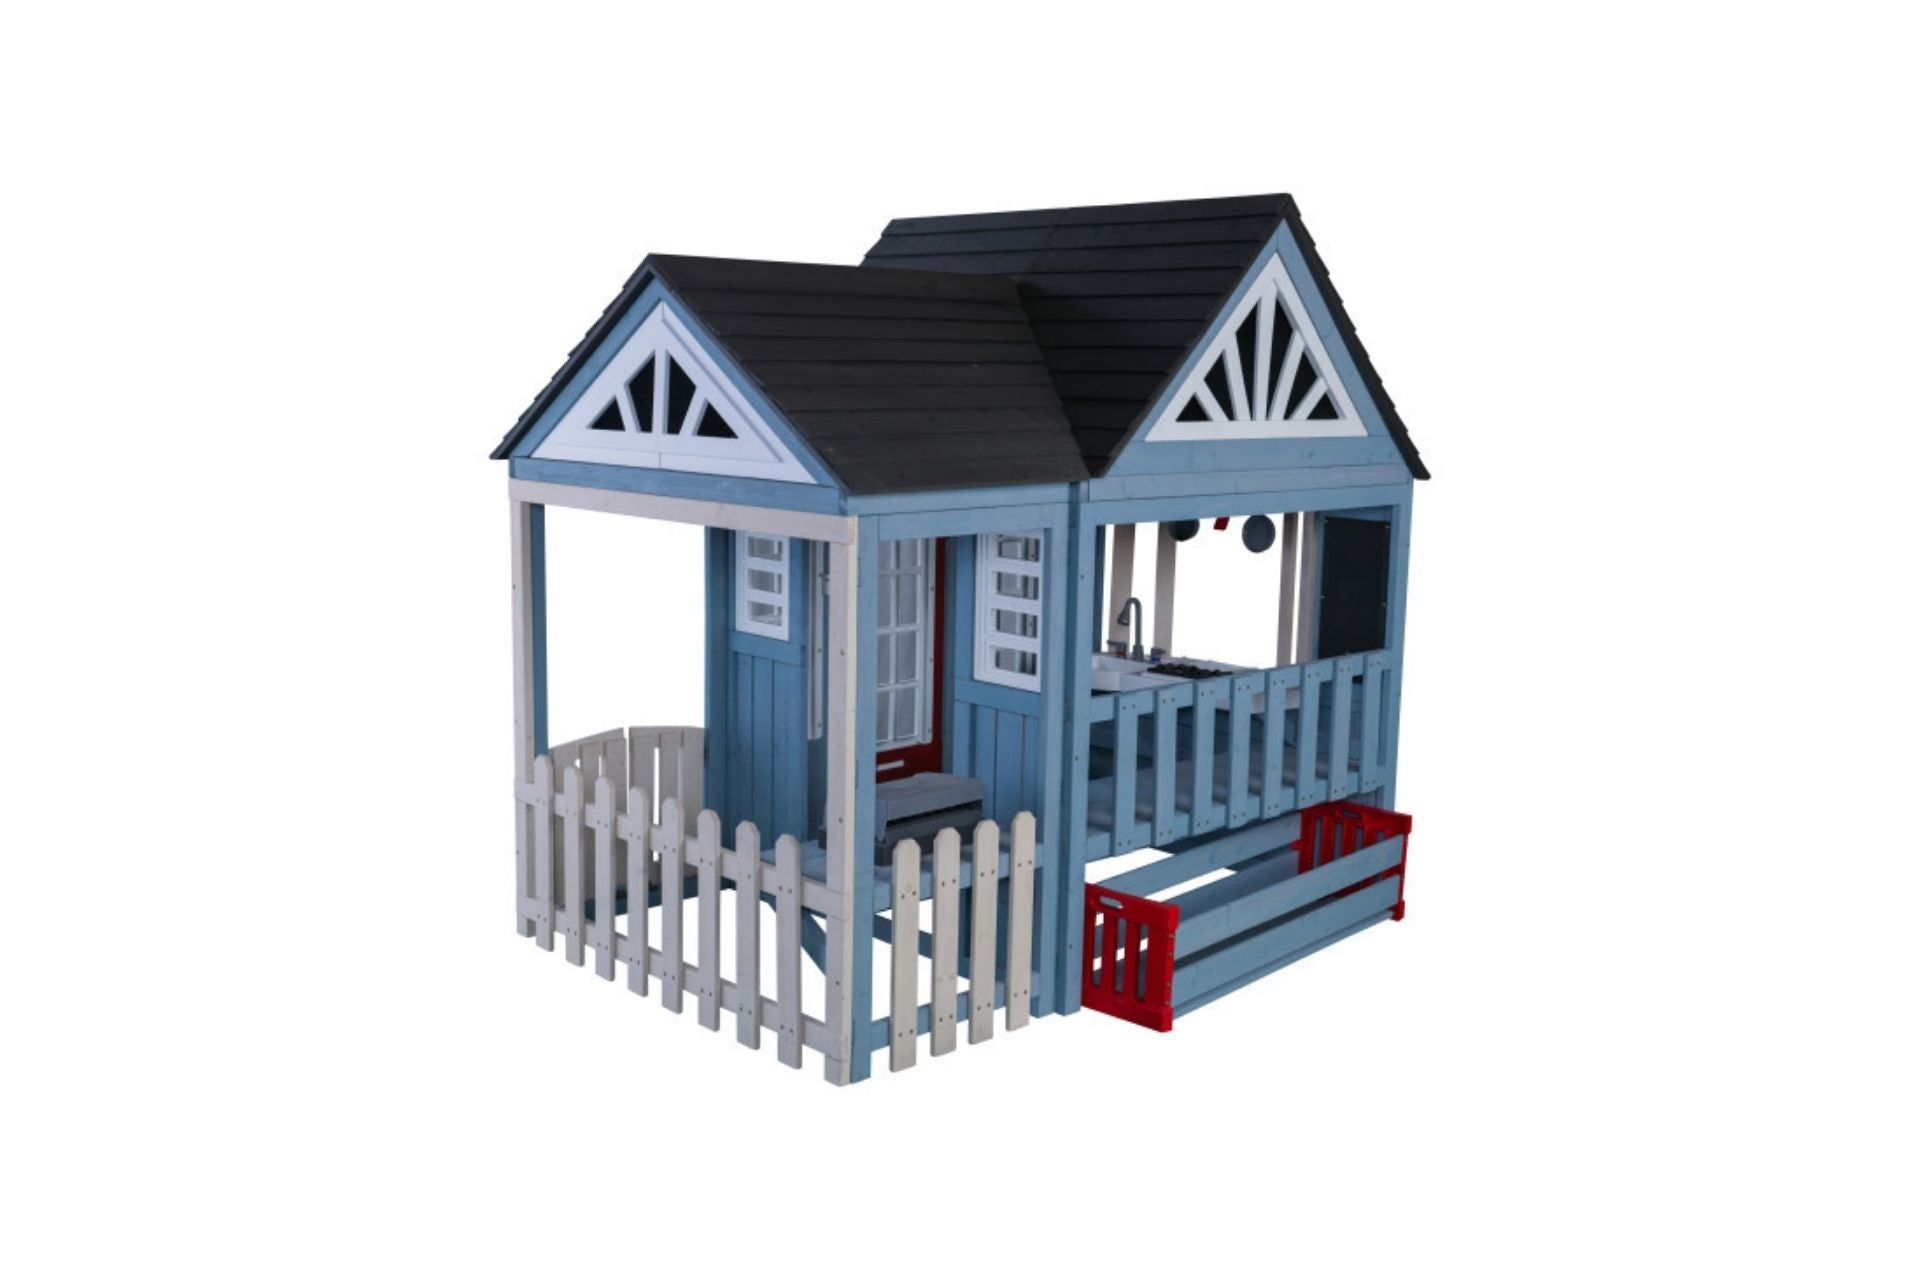 Timber Trail Wooden Outdoor Playhouse